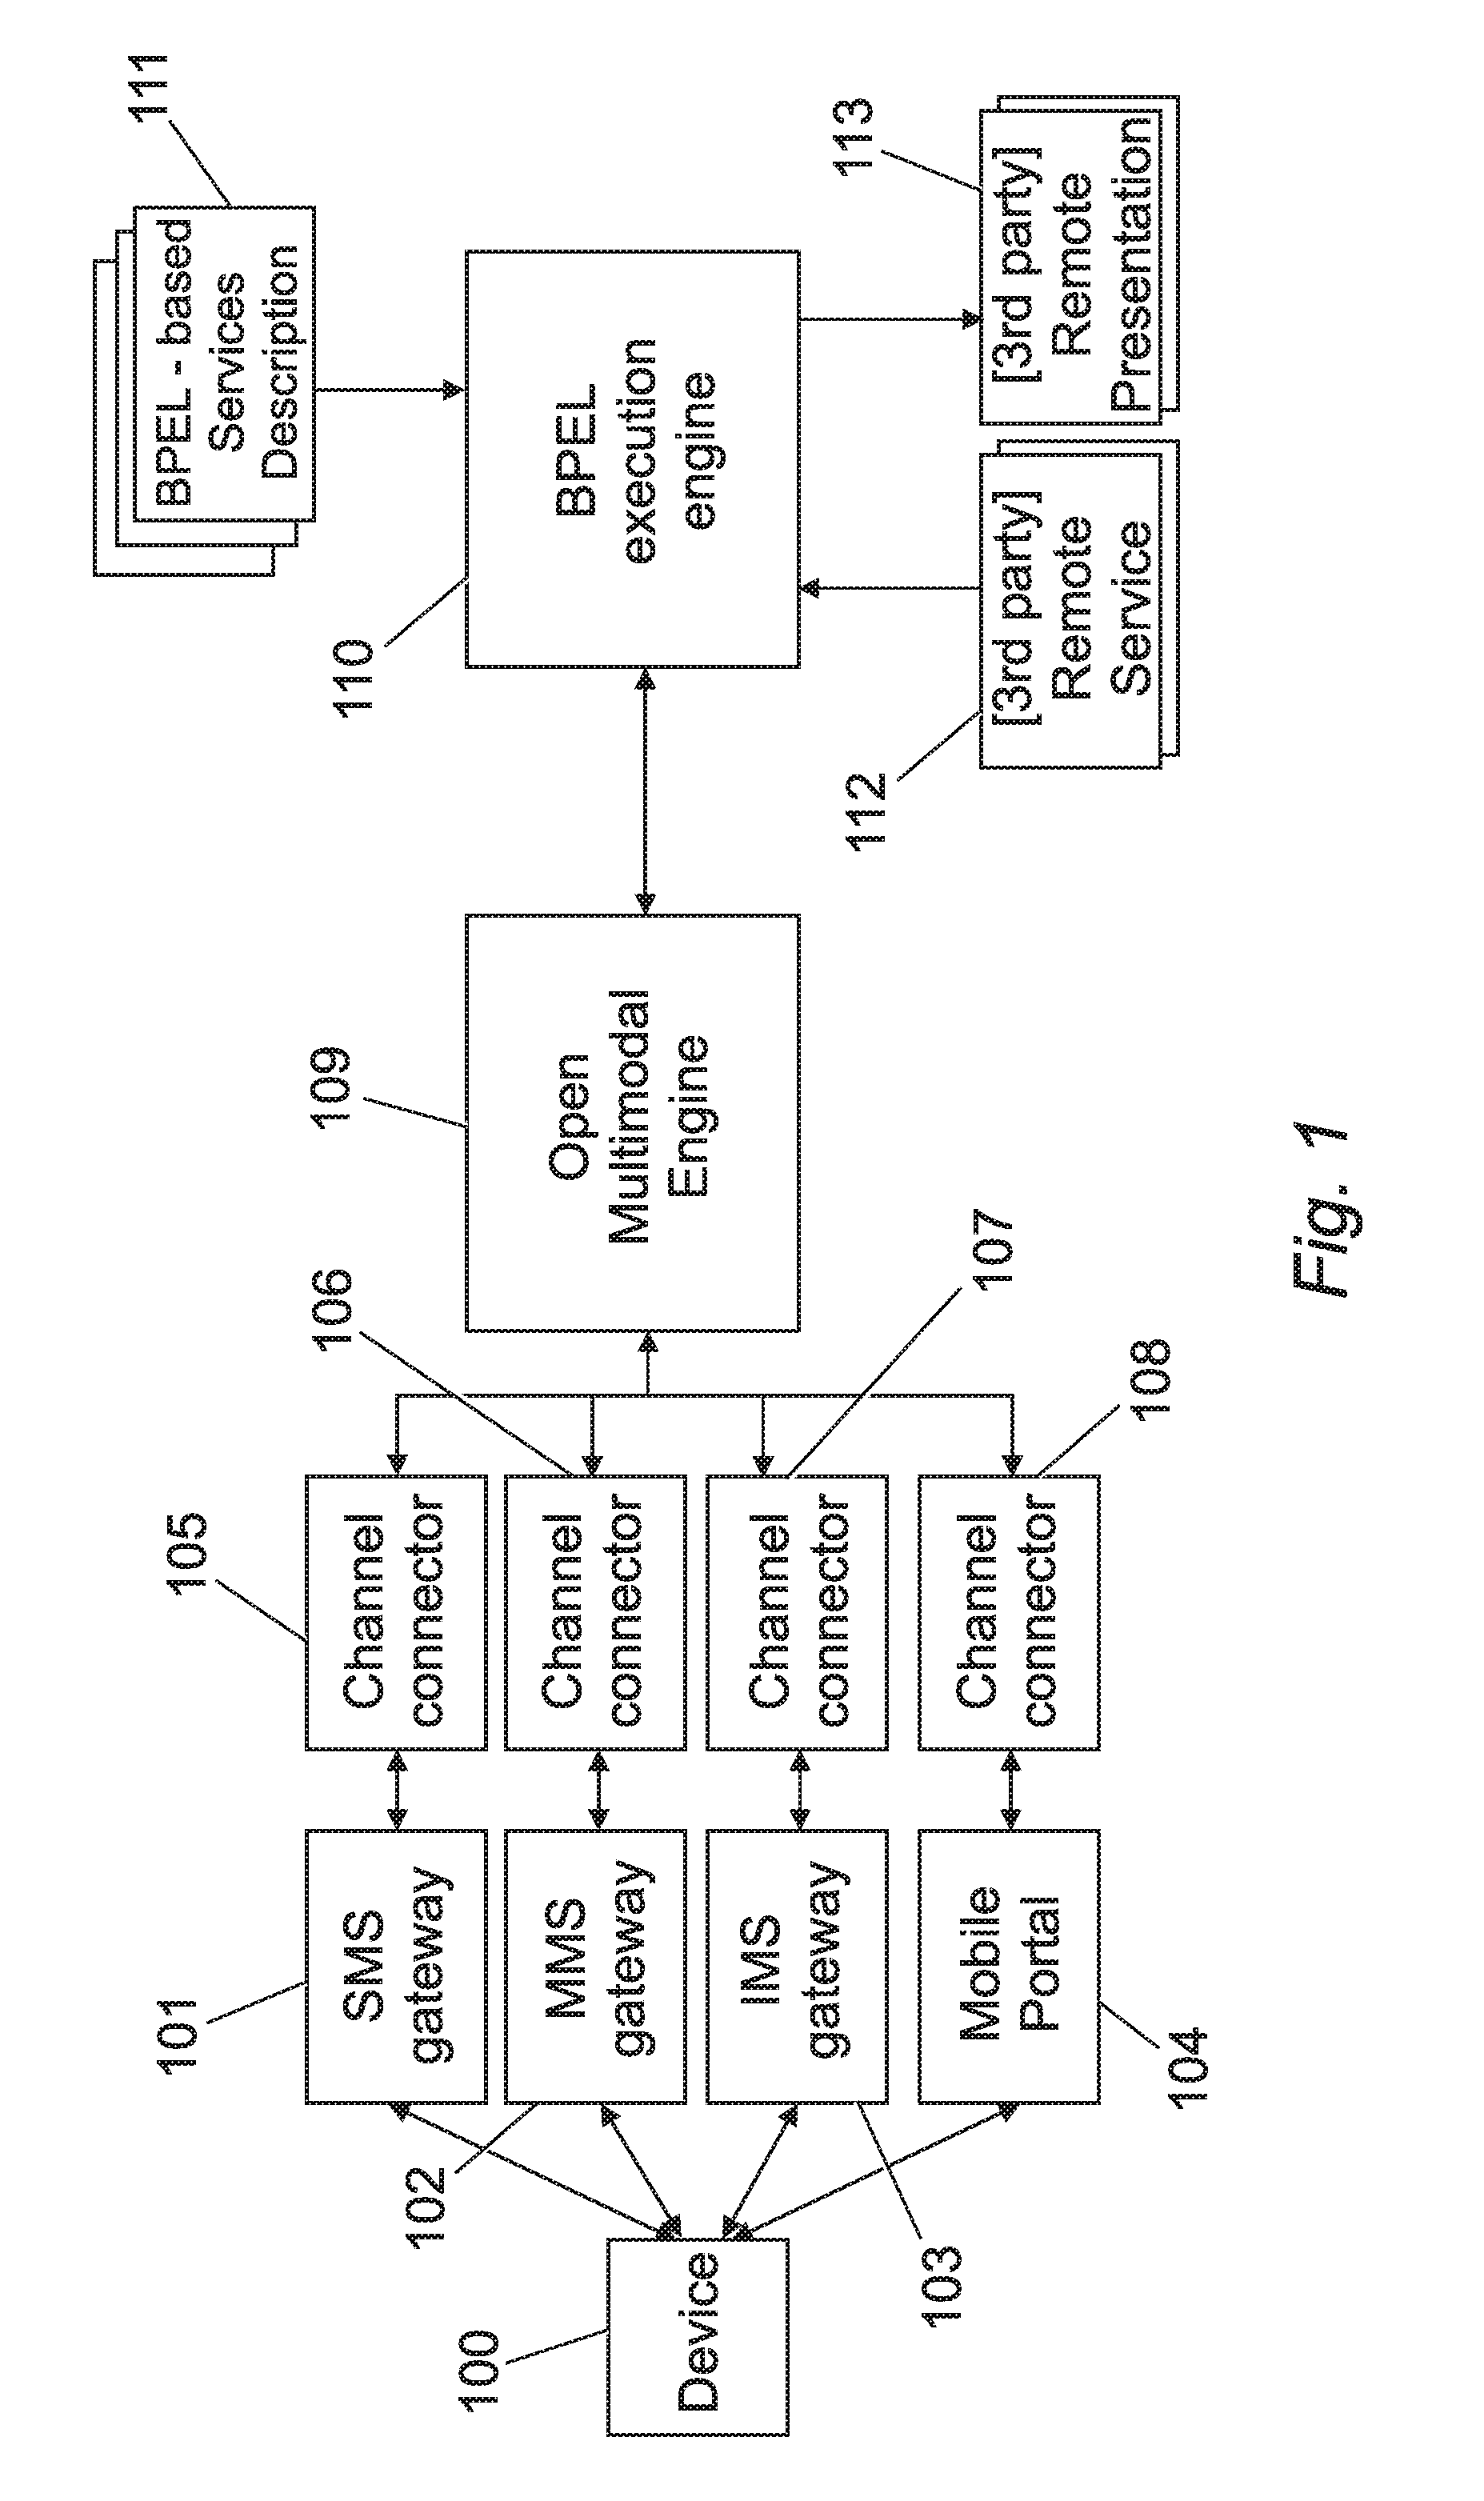 Method and system for providing a response to a user instruction in accordance with a process specified in a high level service description language